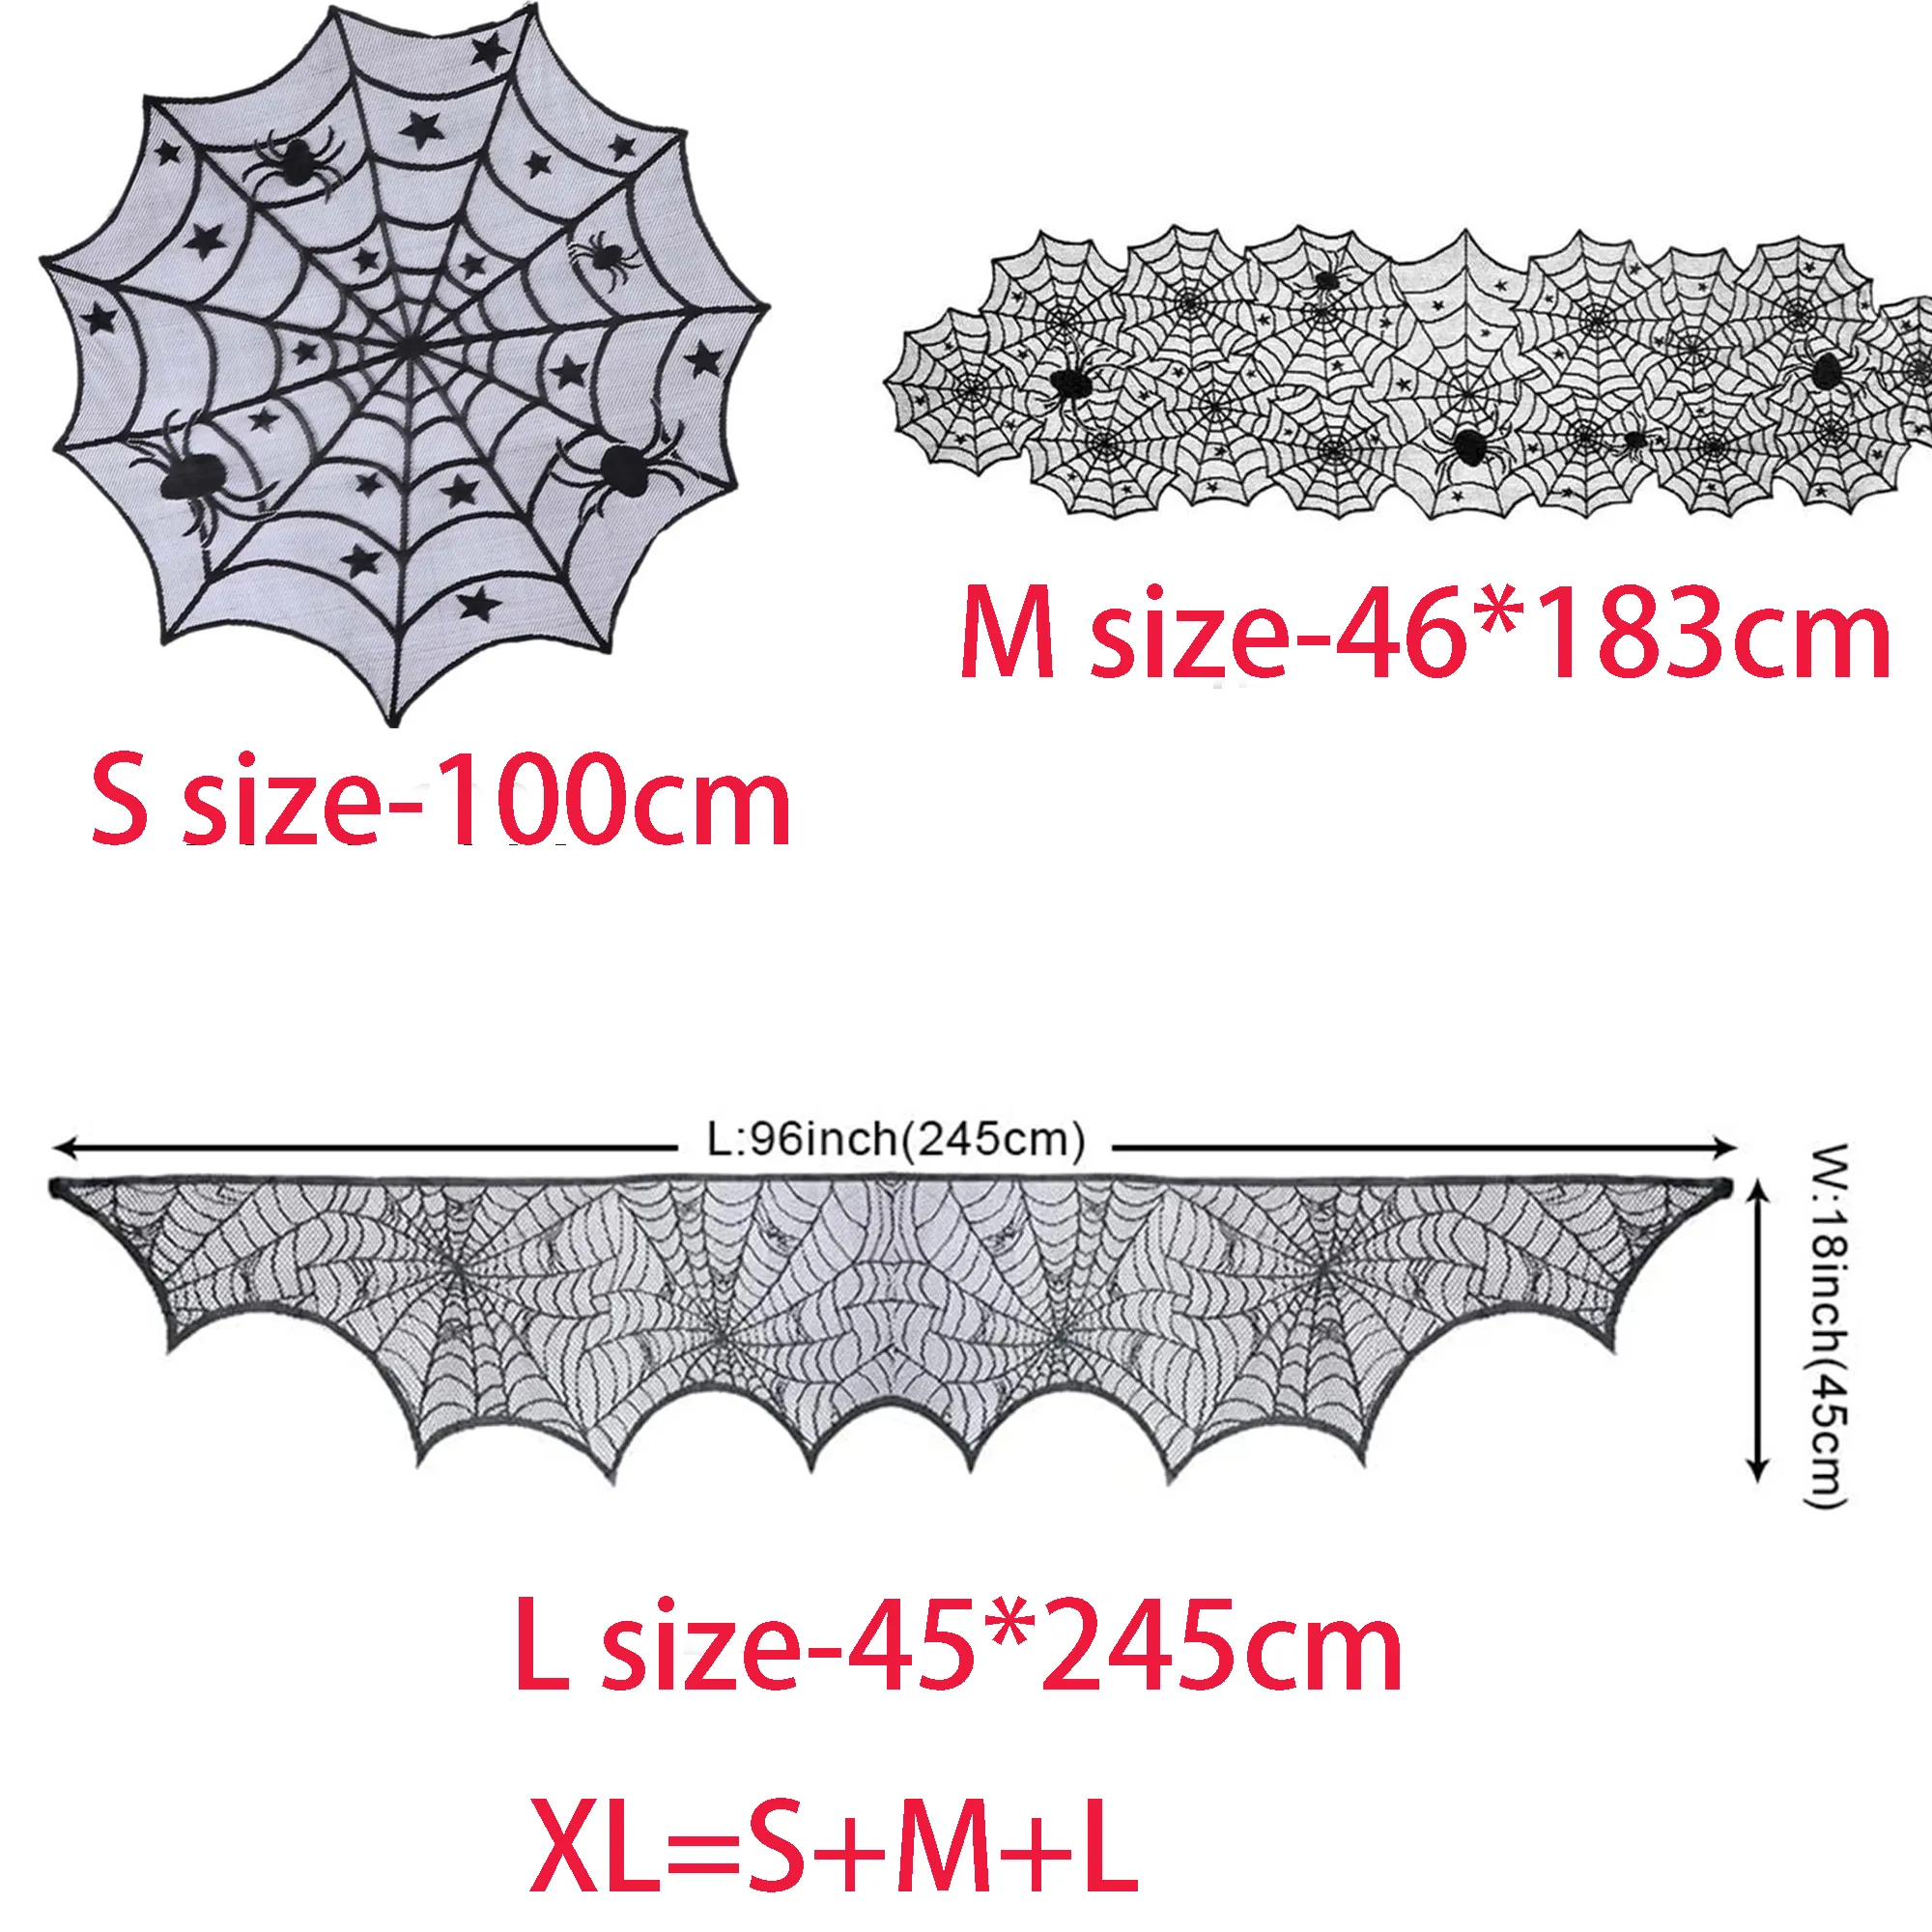 1-pack/3-pack Halloween Cobweb Decorations Spider Web Fireplace Mantel Scarf & Round Table Cover & T